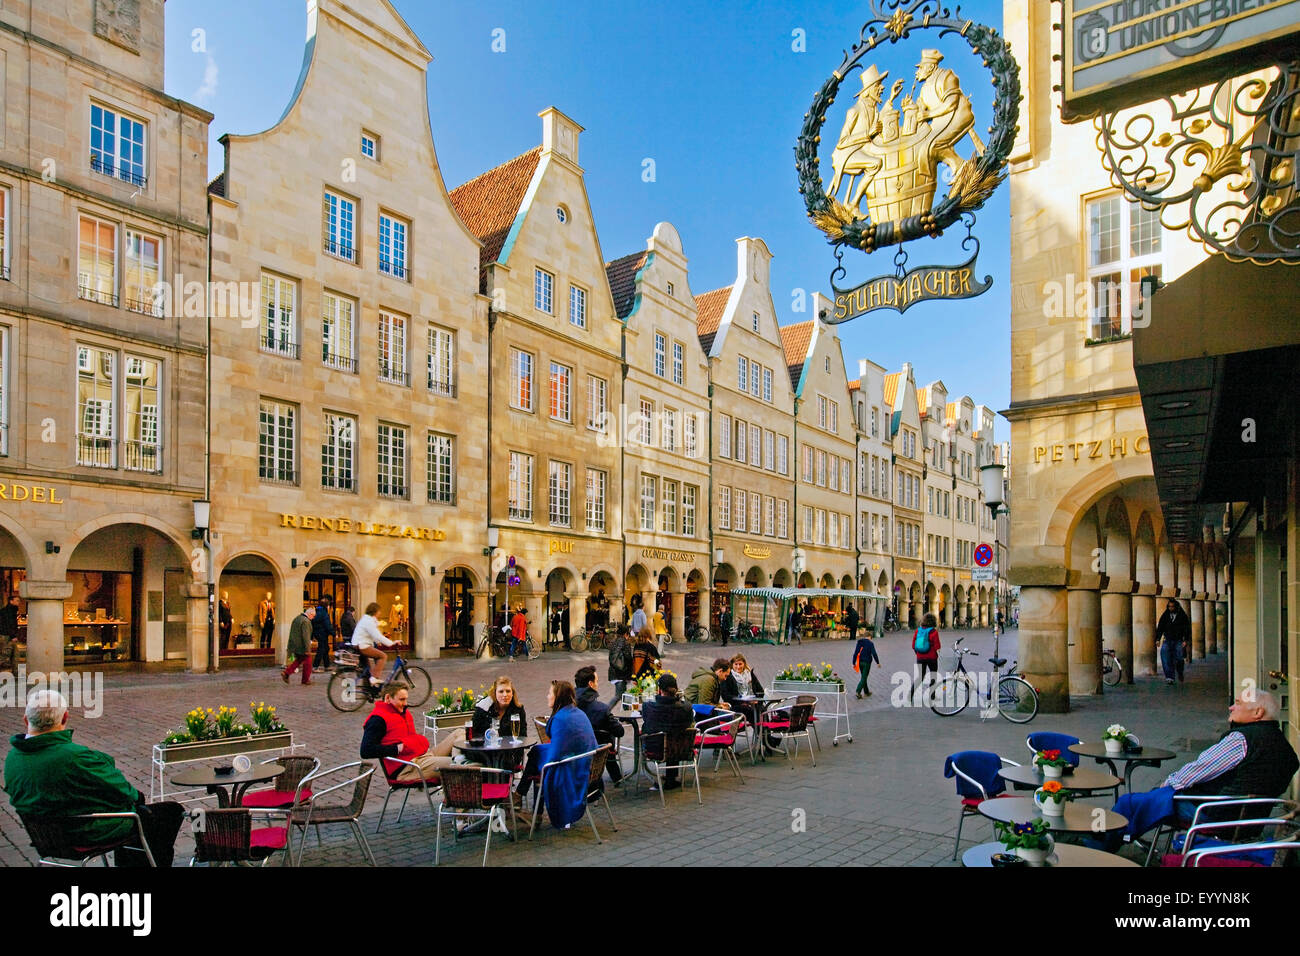 sign Stuhlmacher on front of the sandstone facades of the Prinzipalmarkt, people in the pavement cafe, Germany, North Rhine-Westphalia, Muensterland, Munster Stock Photo